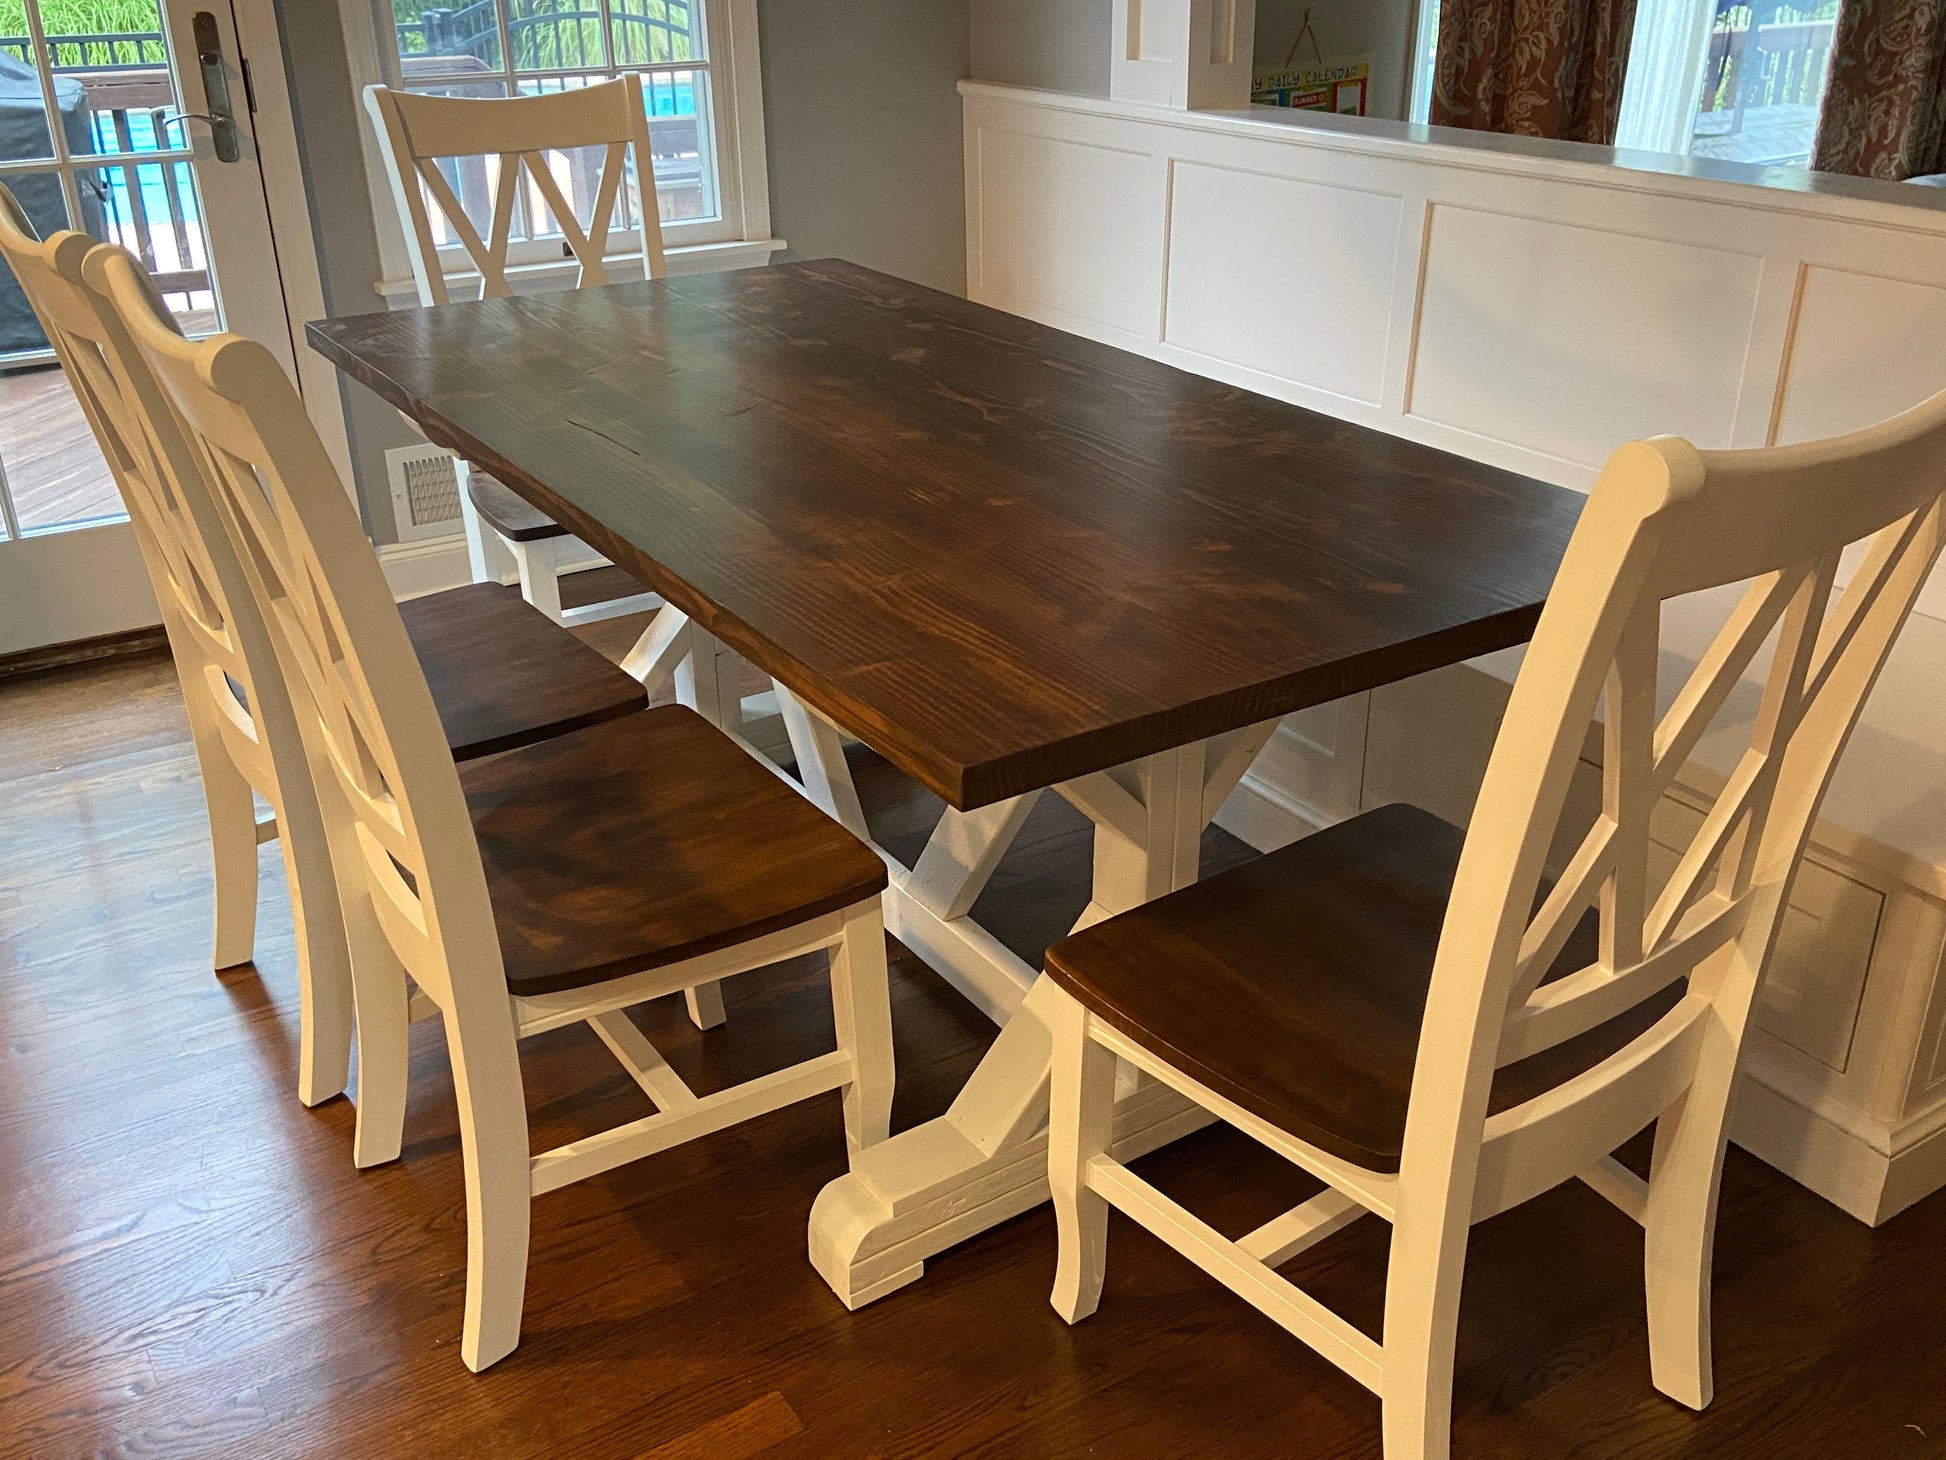 X base banquette seating with farmhouse chairs